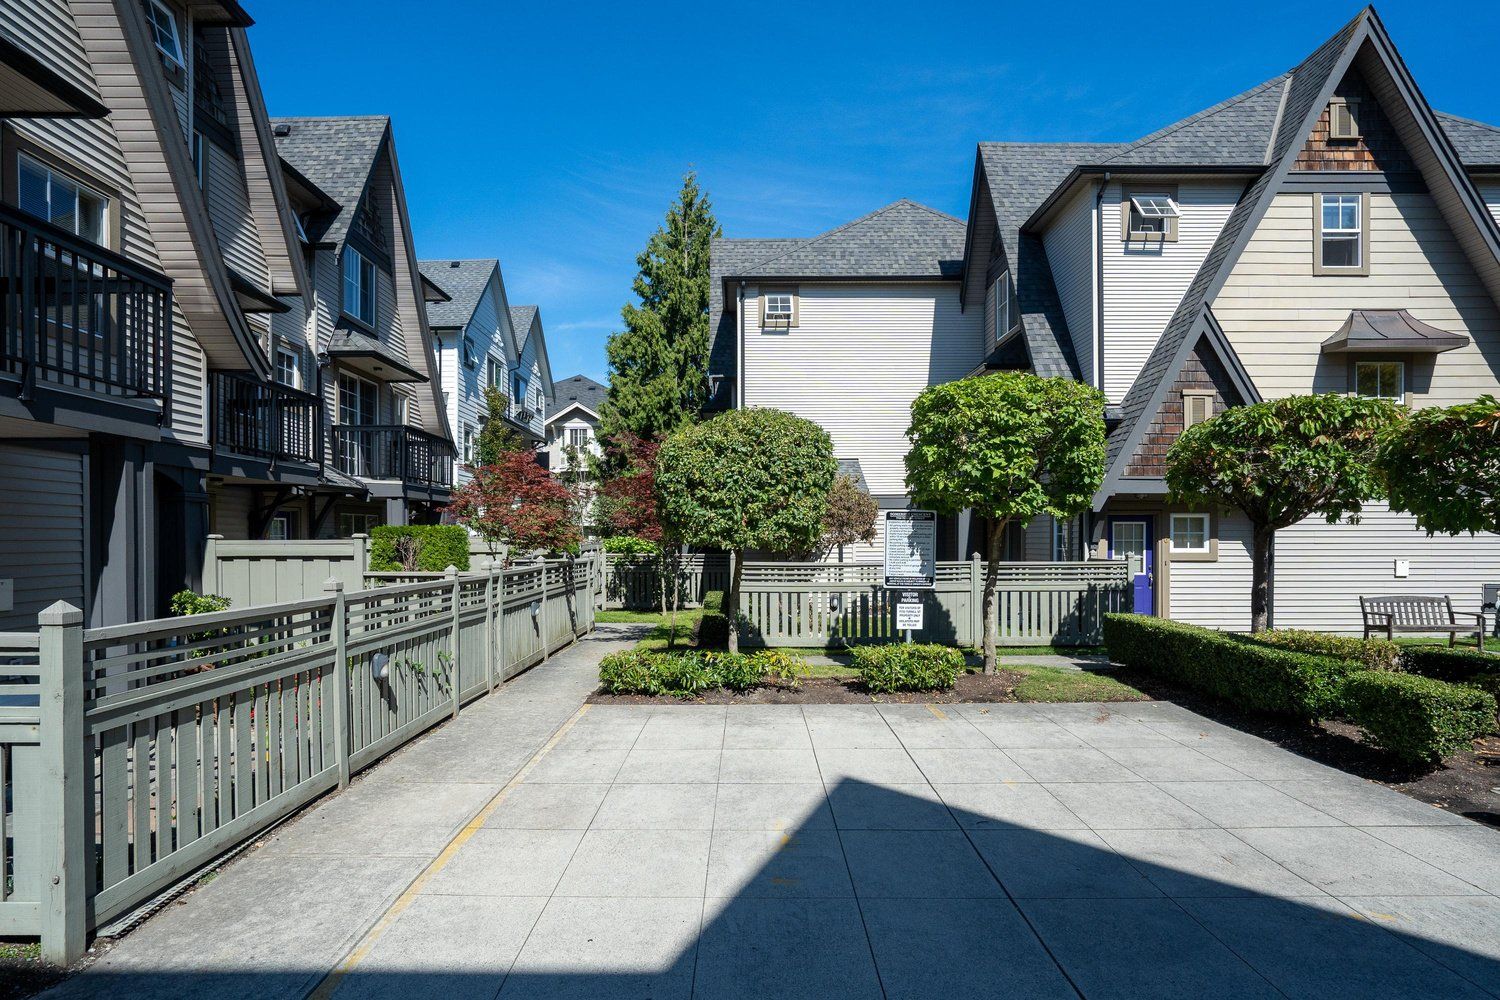 Main Photo: 4 7733 TURNILL Street in Richmond: McLennan North Townhouse for sale : MLS®# R2629171